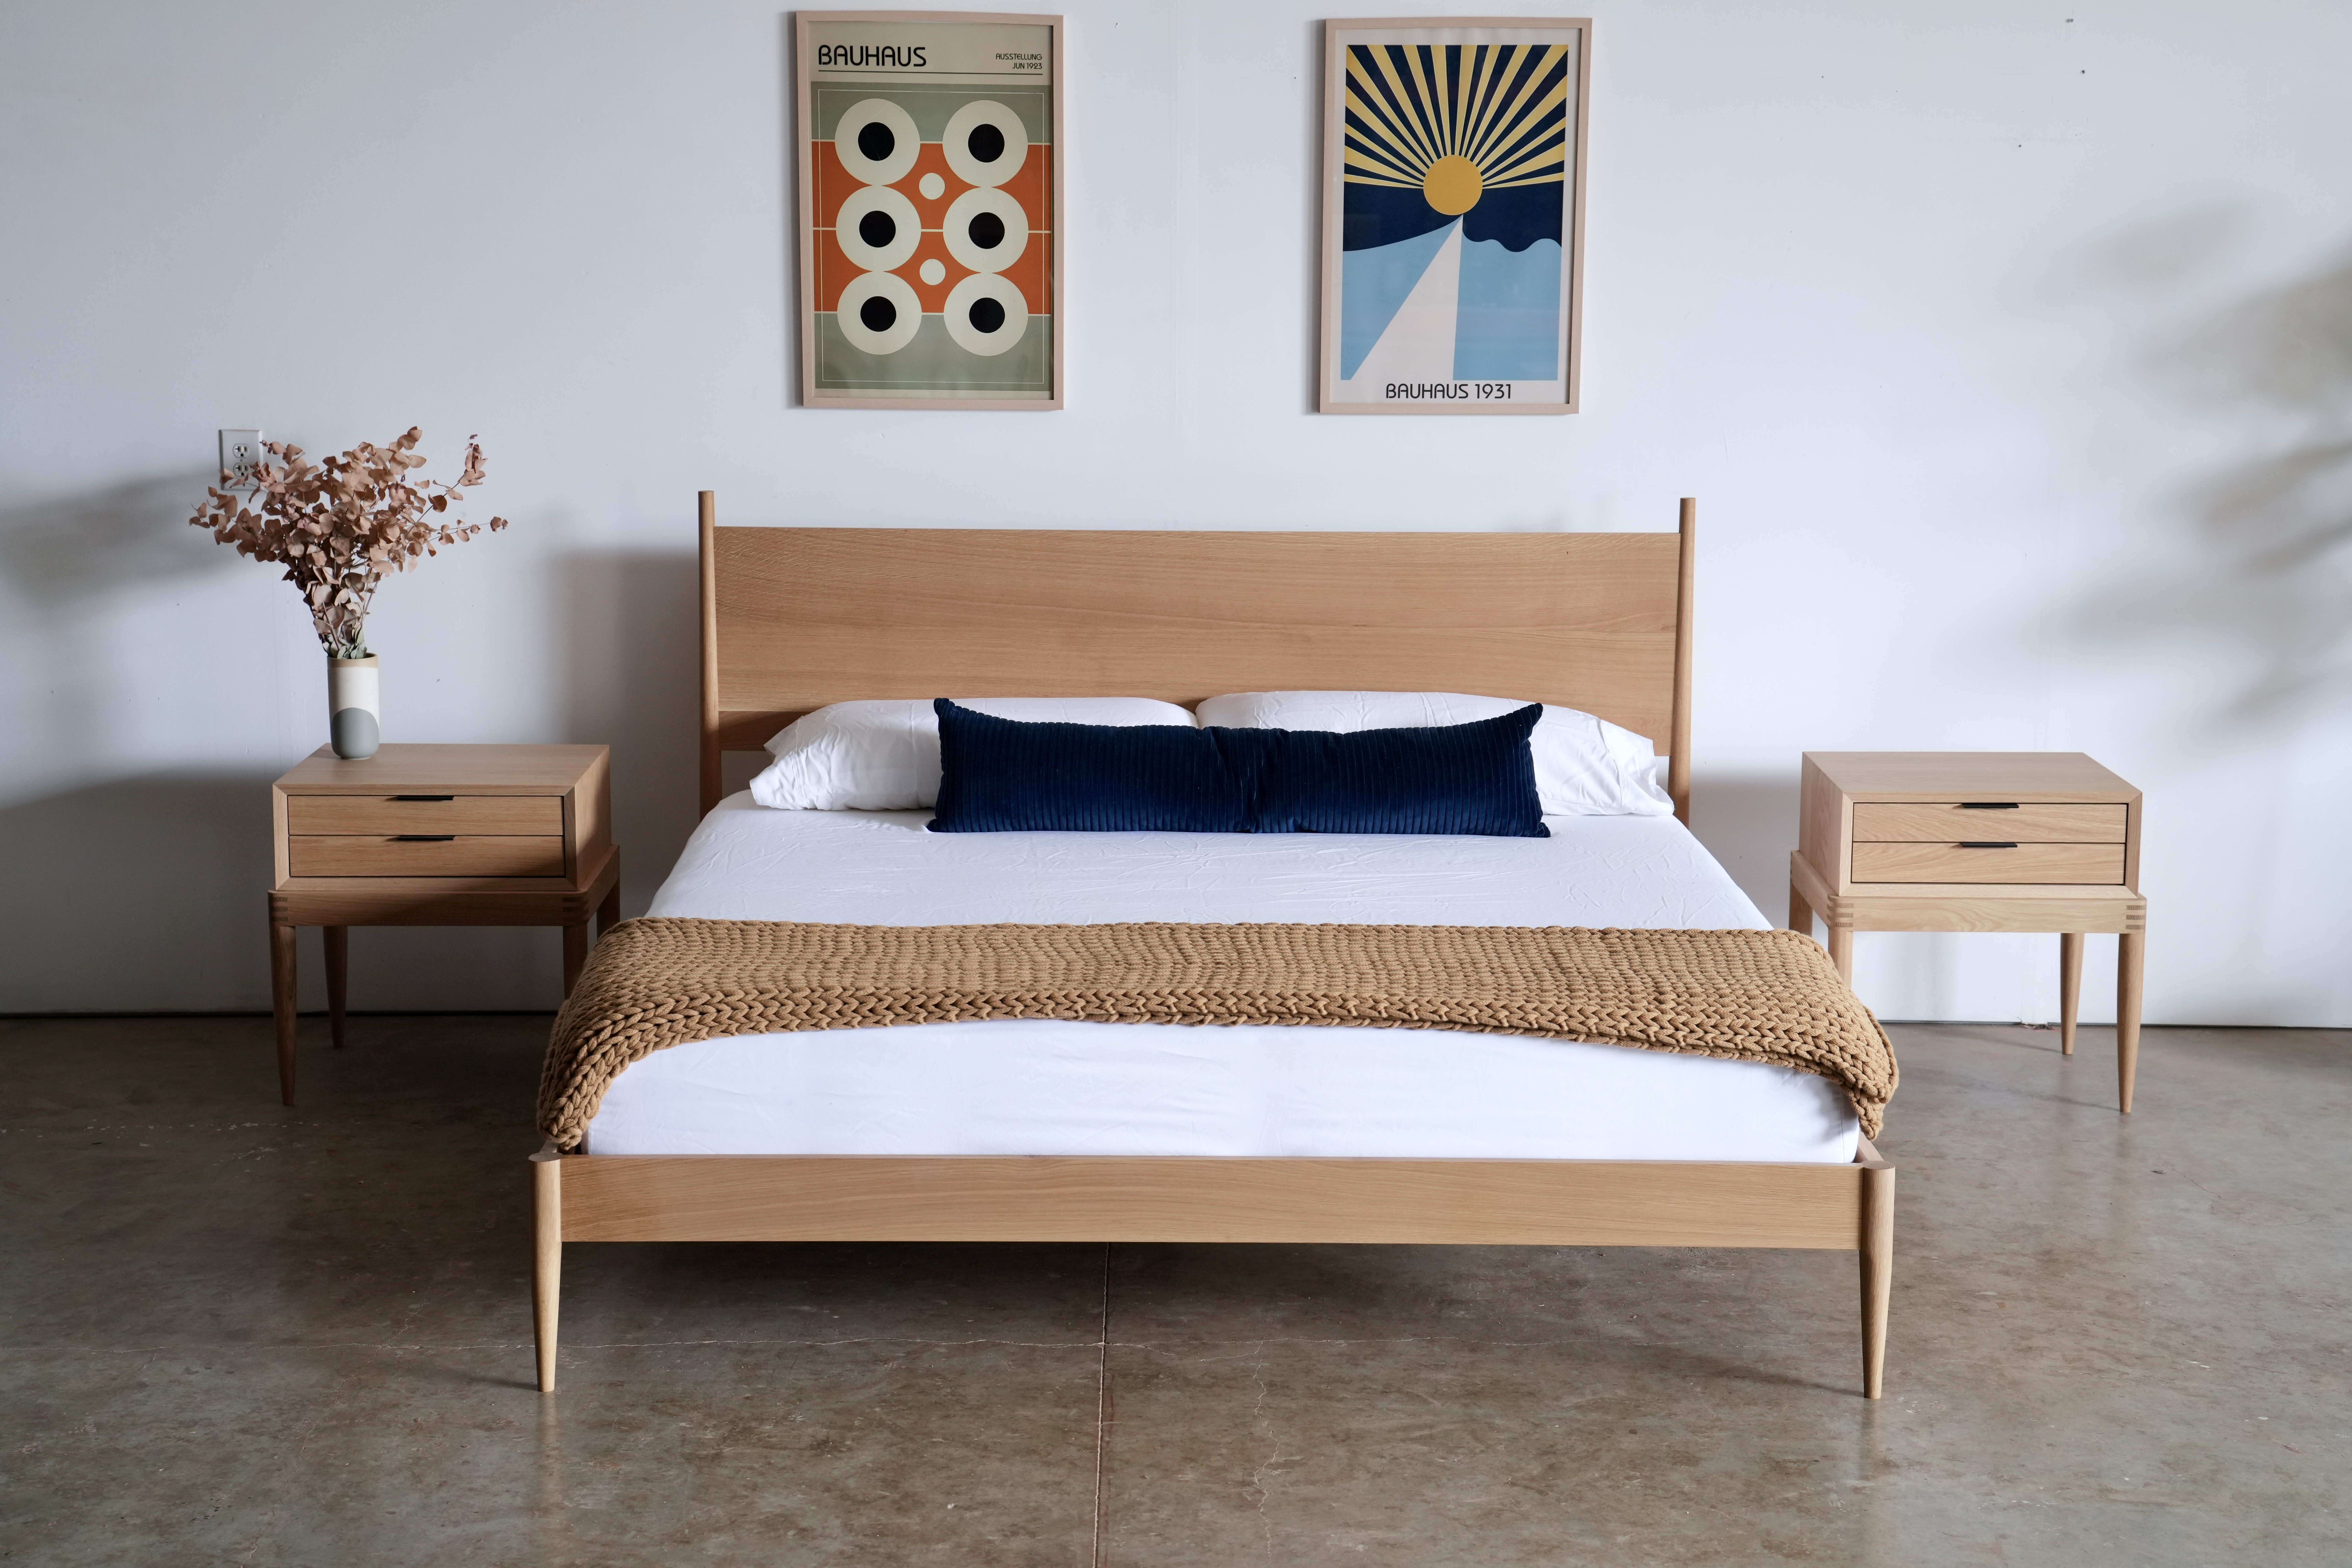 A simple midcentury modern bed in white oak with a blue pillow and yellow throw blanket at the foot.